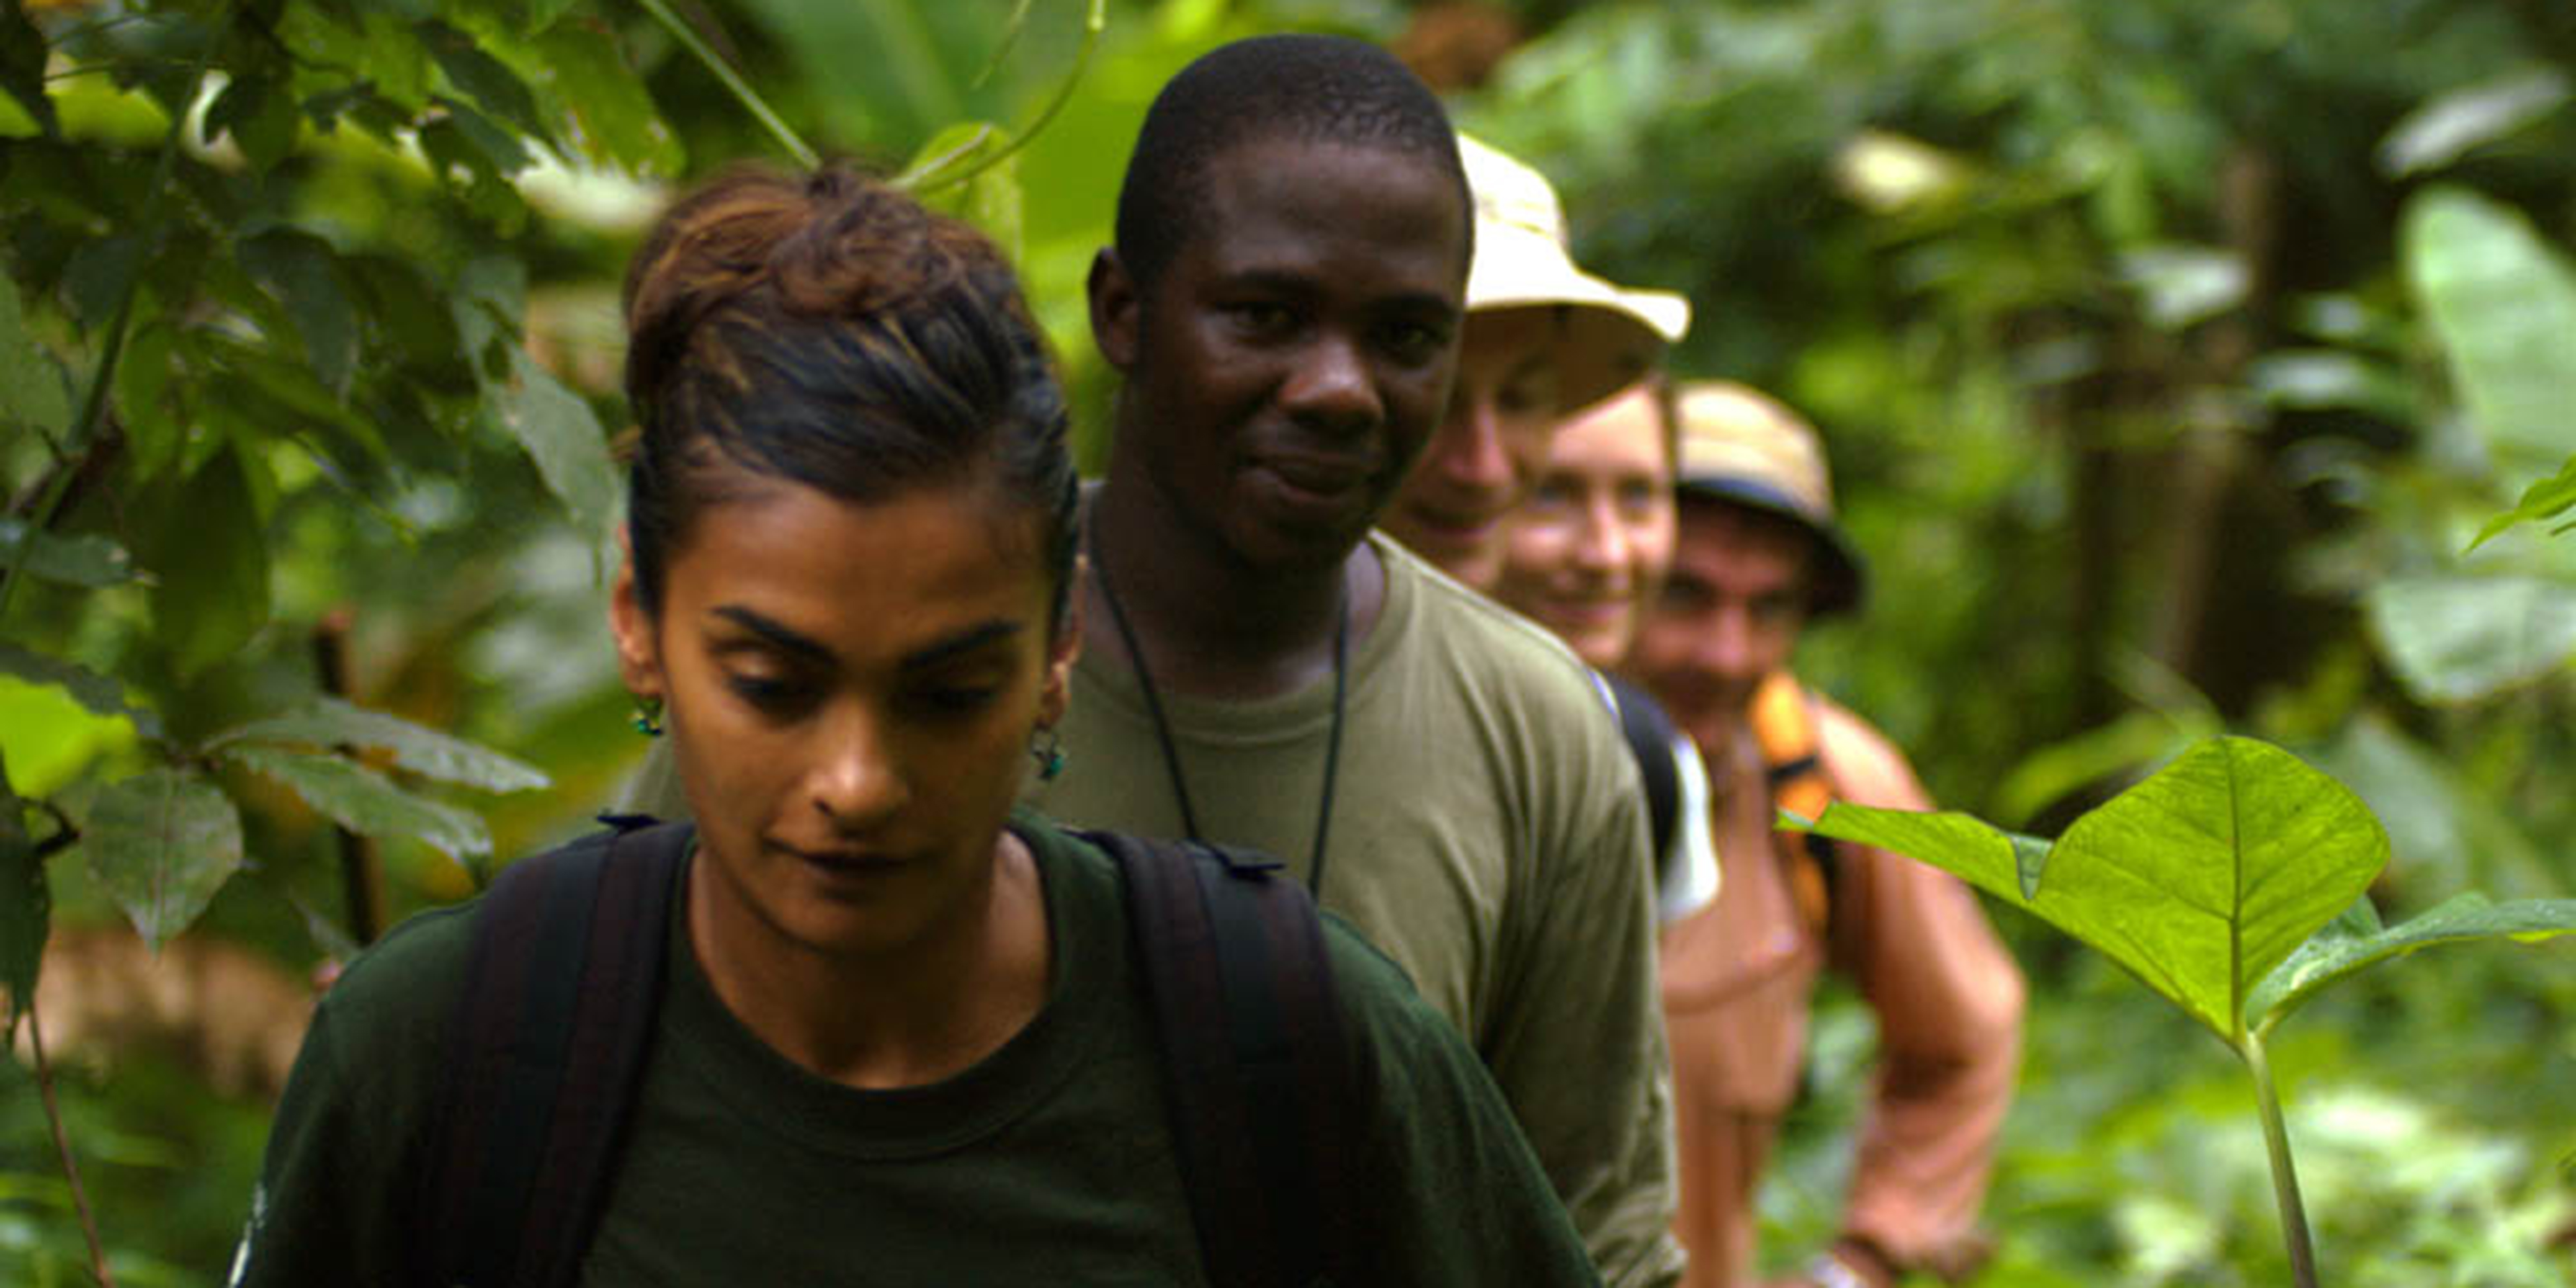 Trailblazer members receive one entry per year to win a FREE Earthwatch expedition.